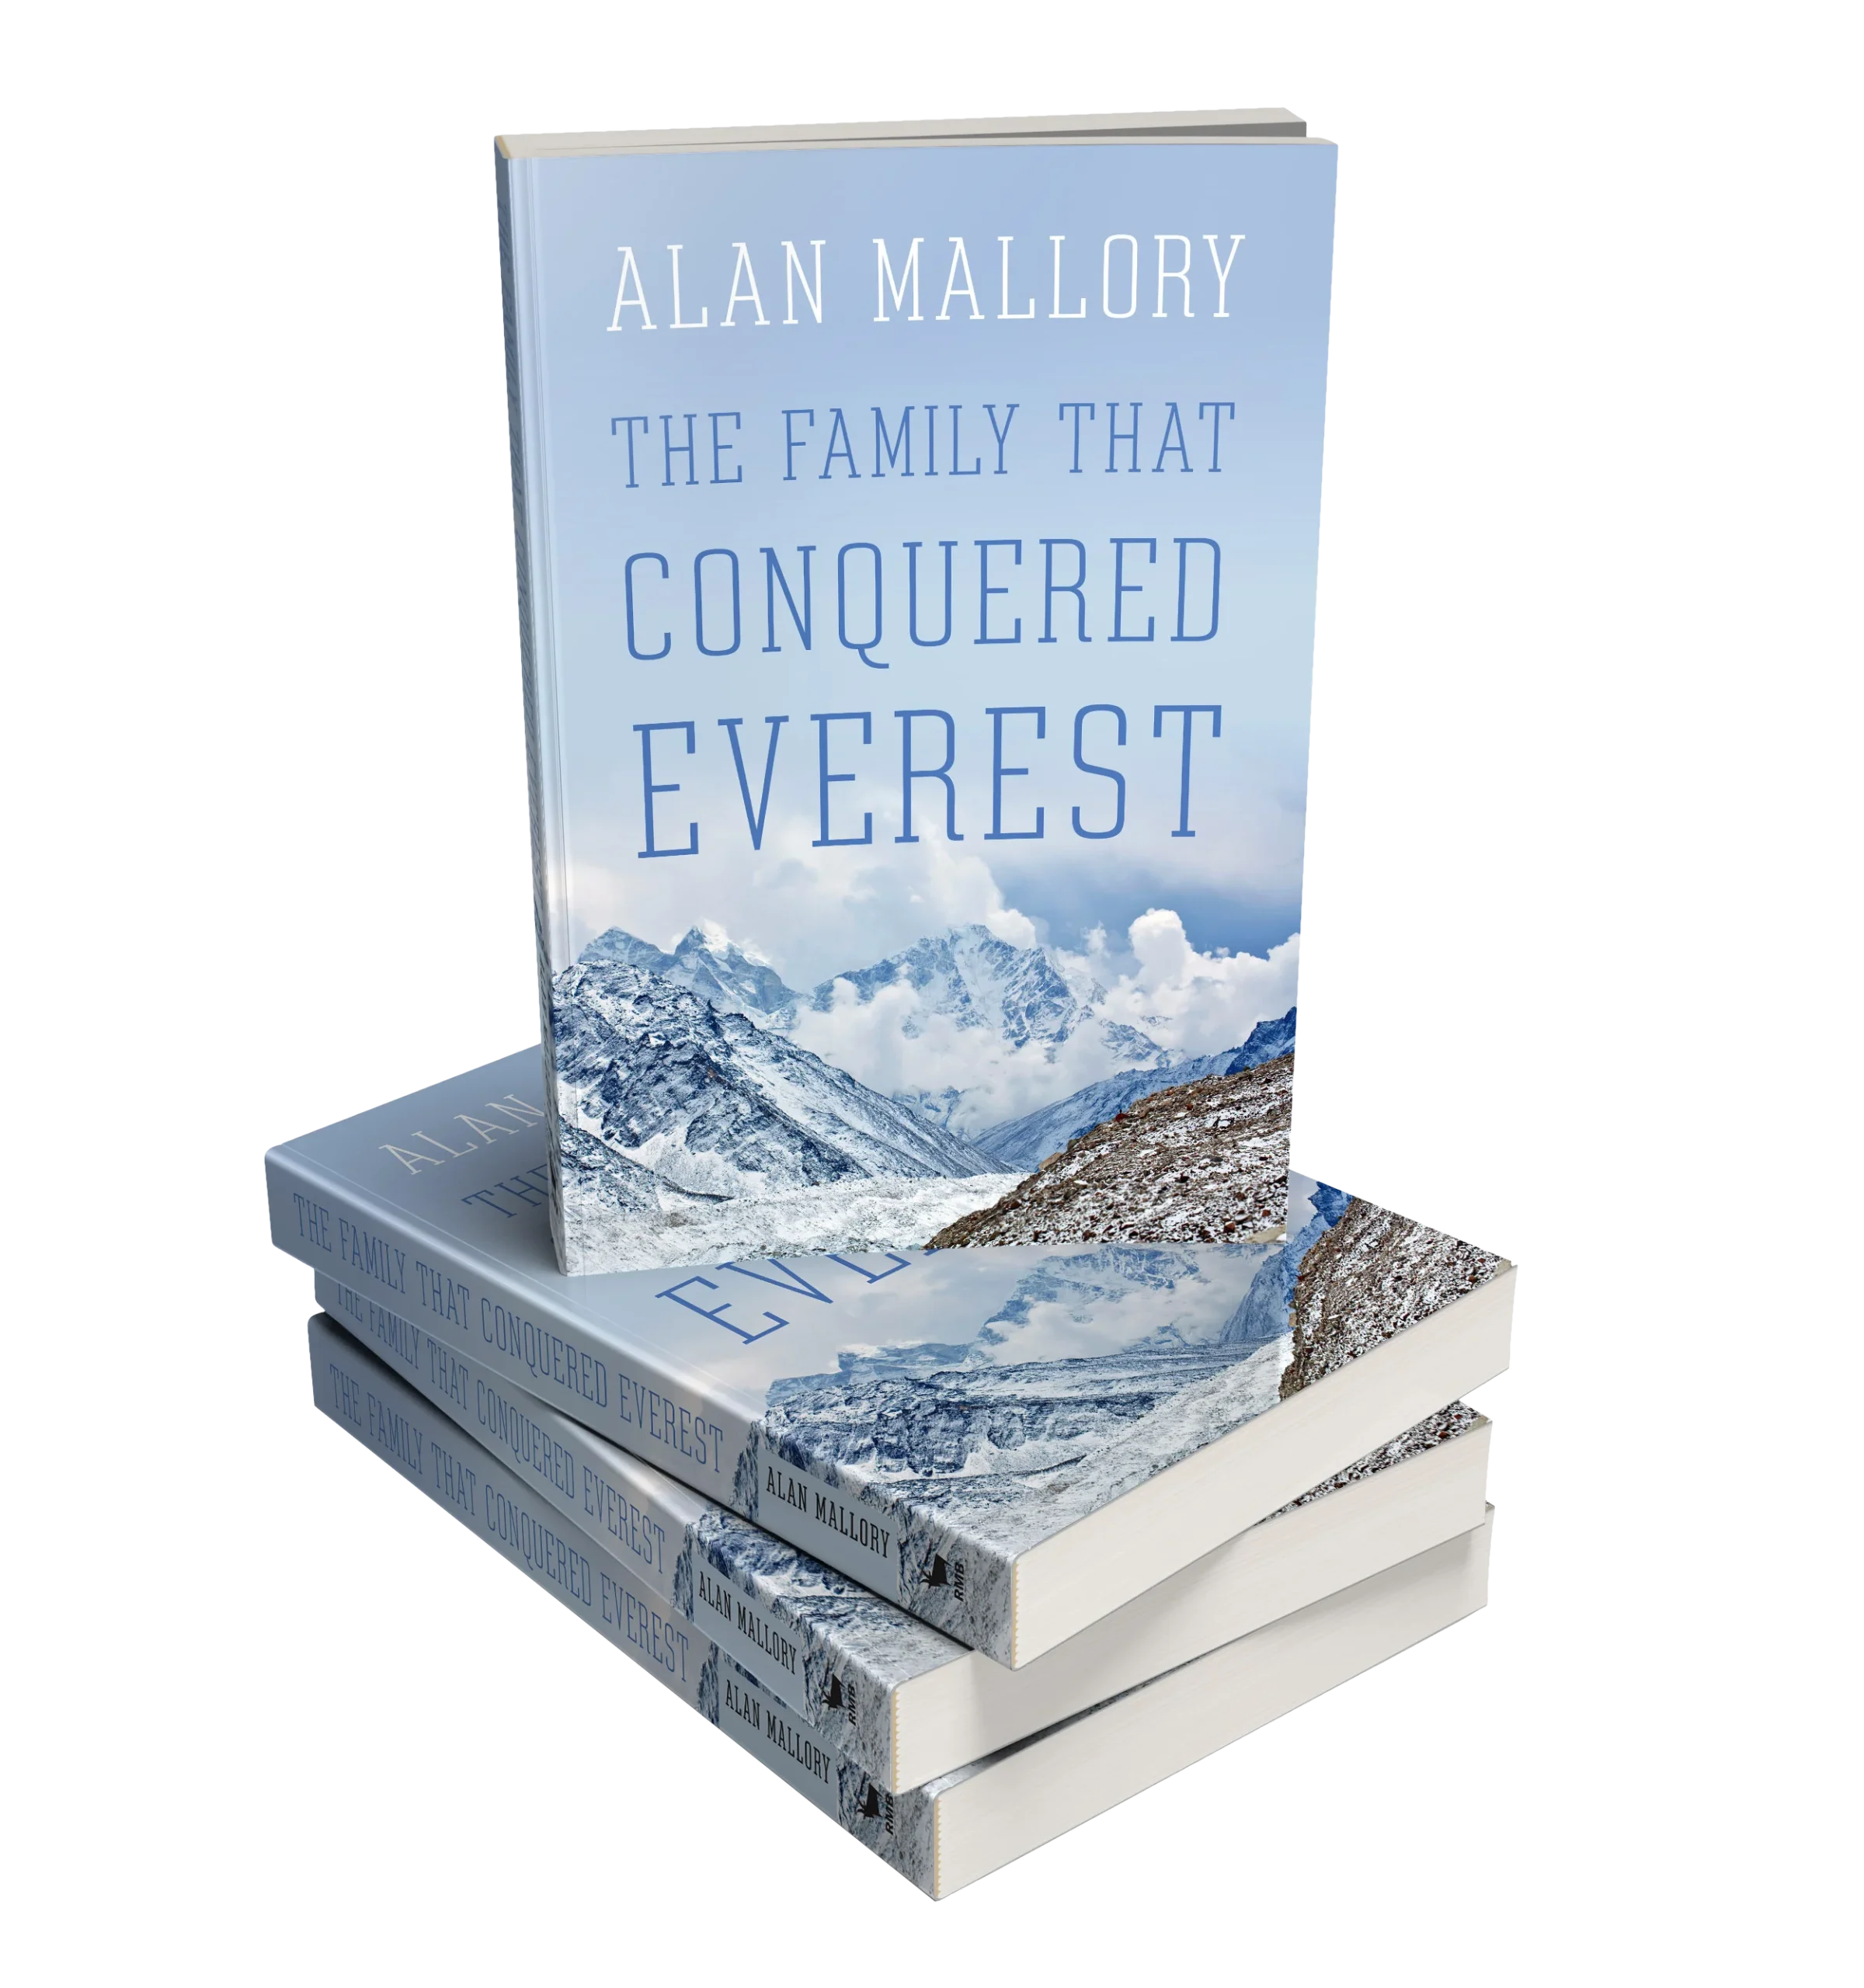 Alan Mallory - The Family that Conquered Everest